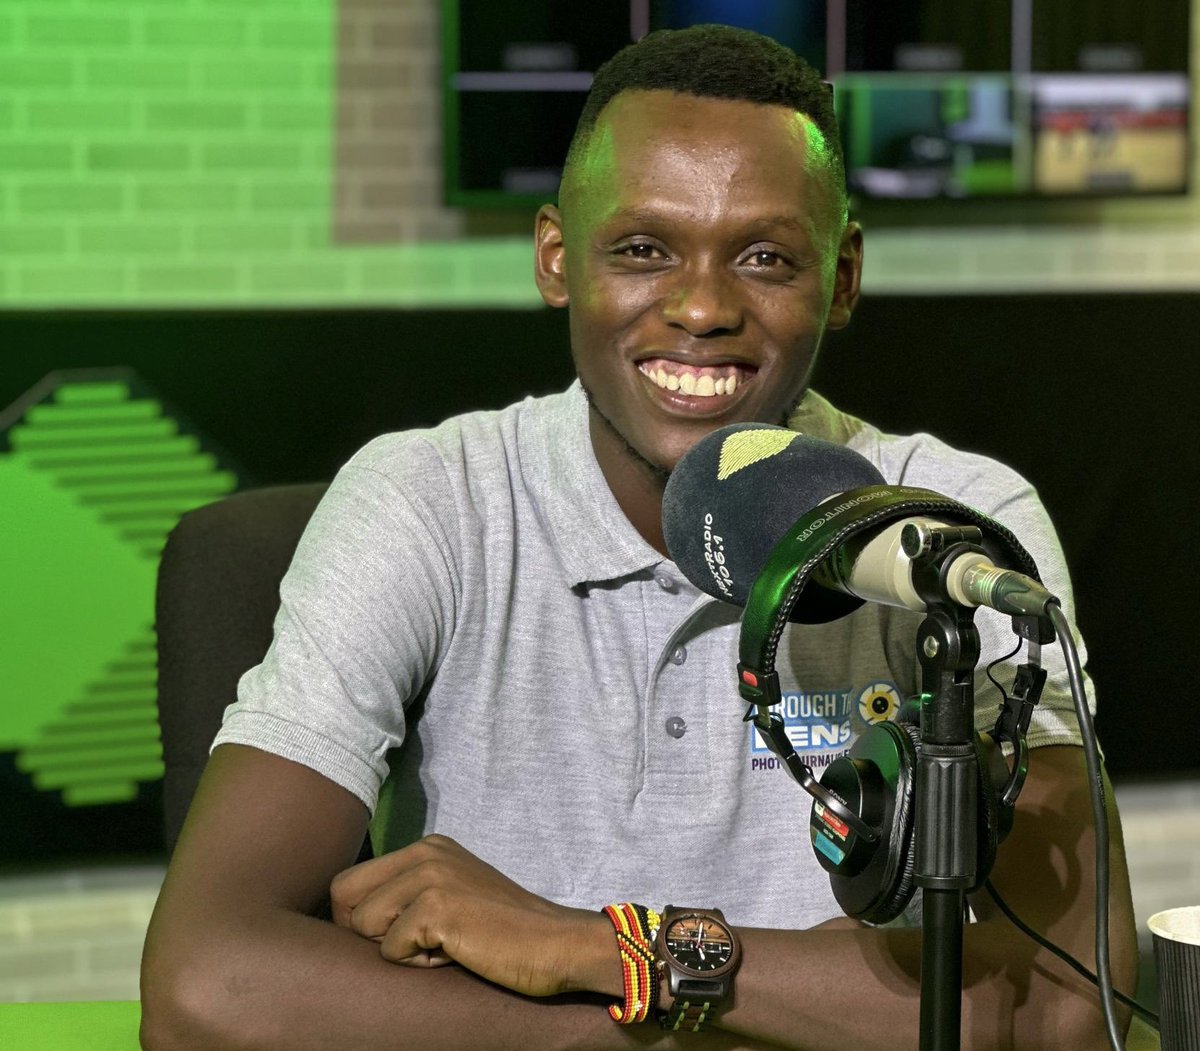 .@francis_isano: My family at one time thought that taking someone to the university to study photography would not have an impact.

#NextRadioUG  #NextBigTalk #ThroughTheLensUg